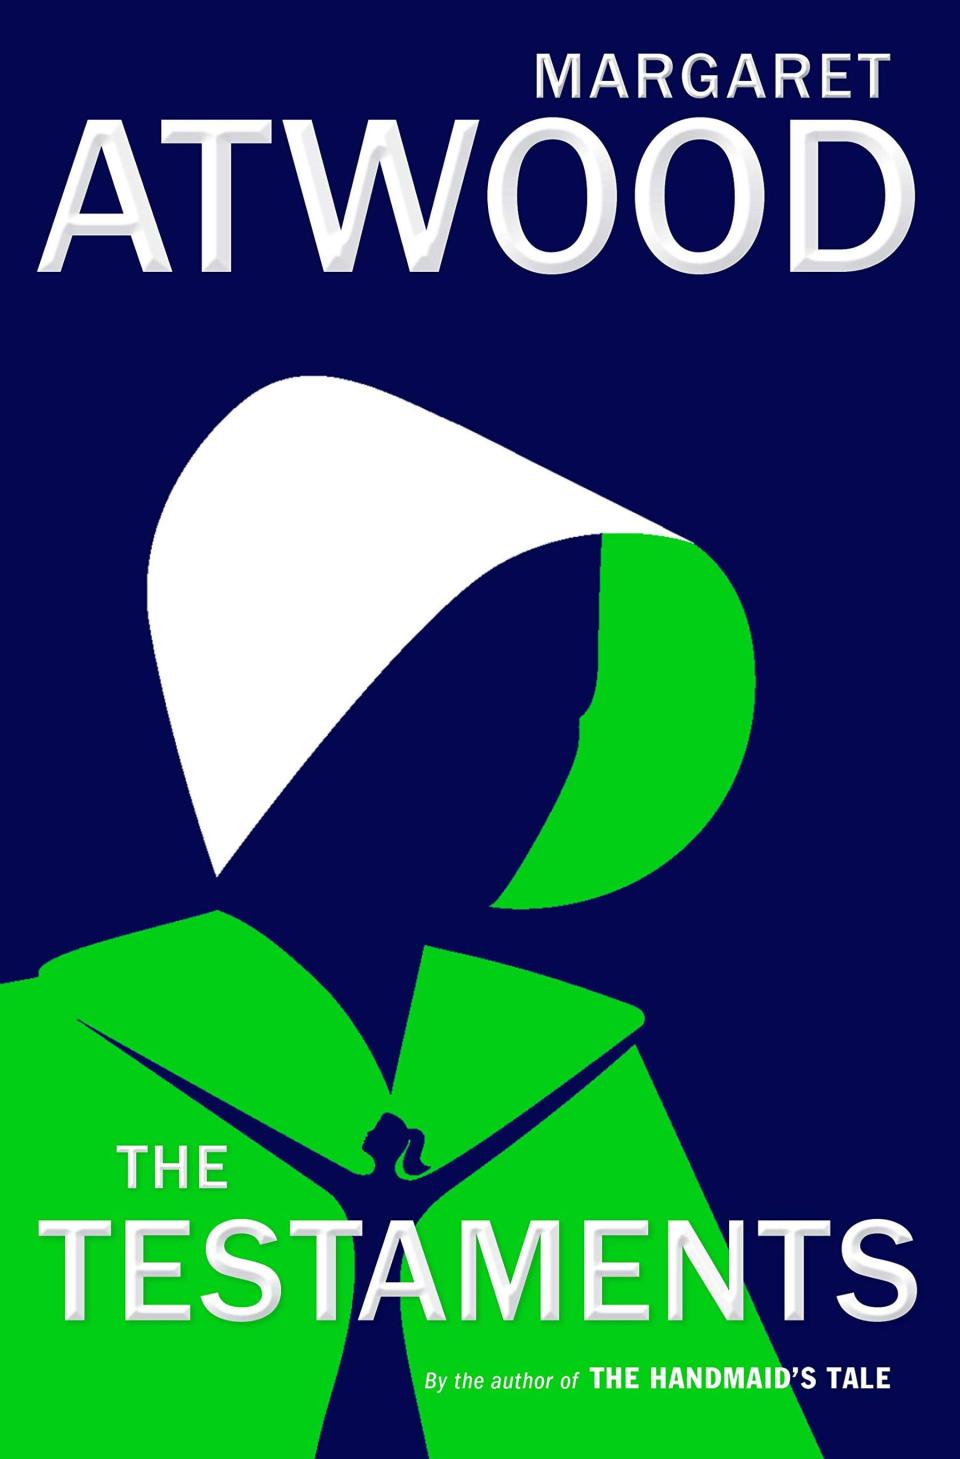 Margaret Atwood's sequel to The Handmaid's Tale is an essential, moving thriller